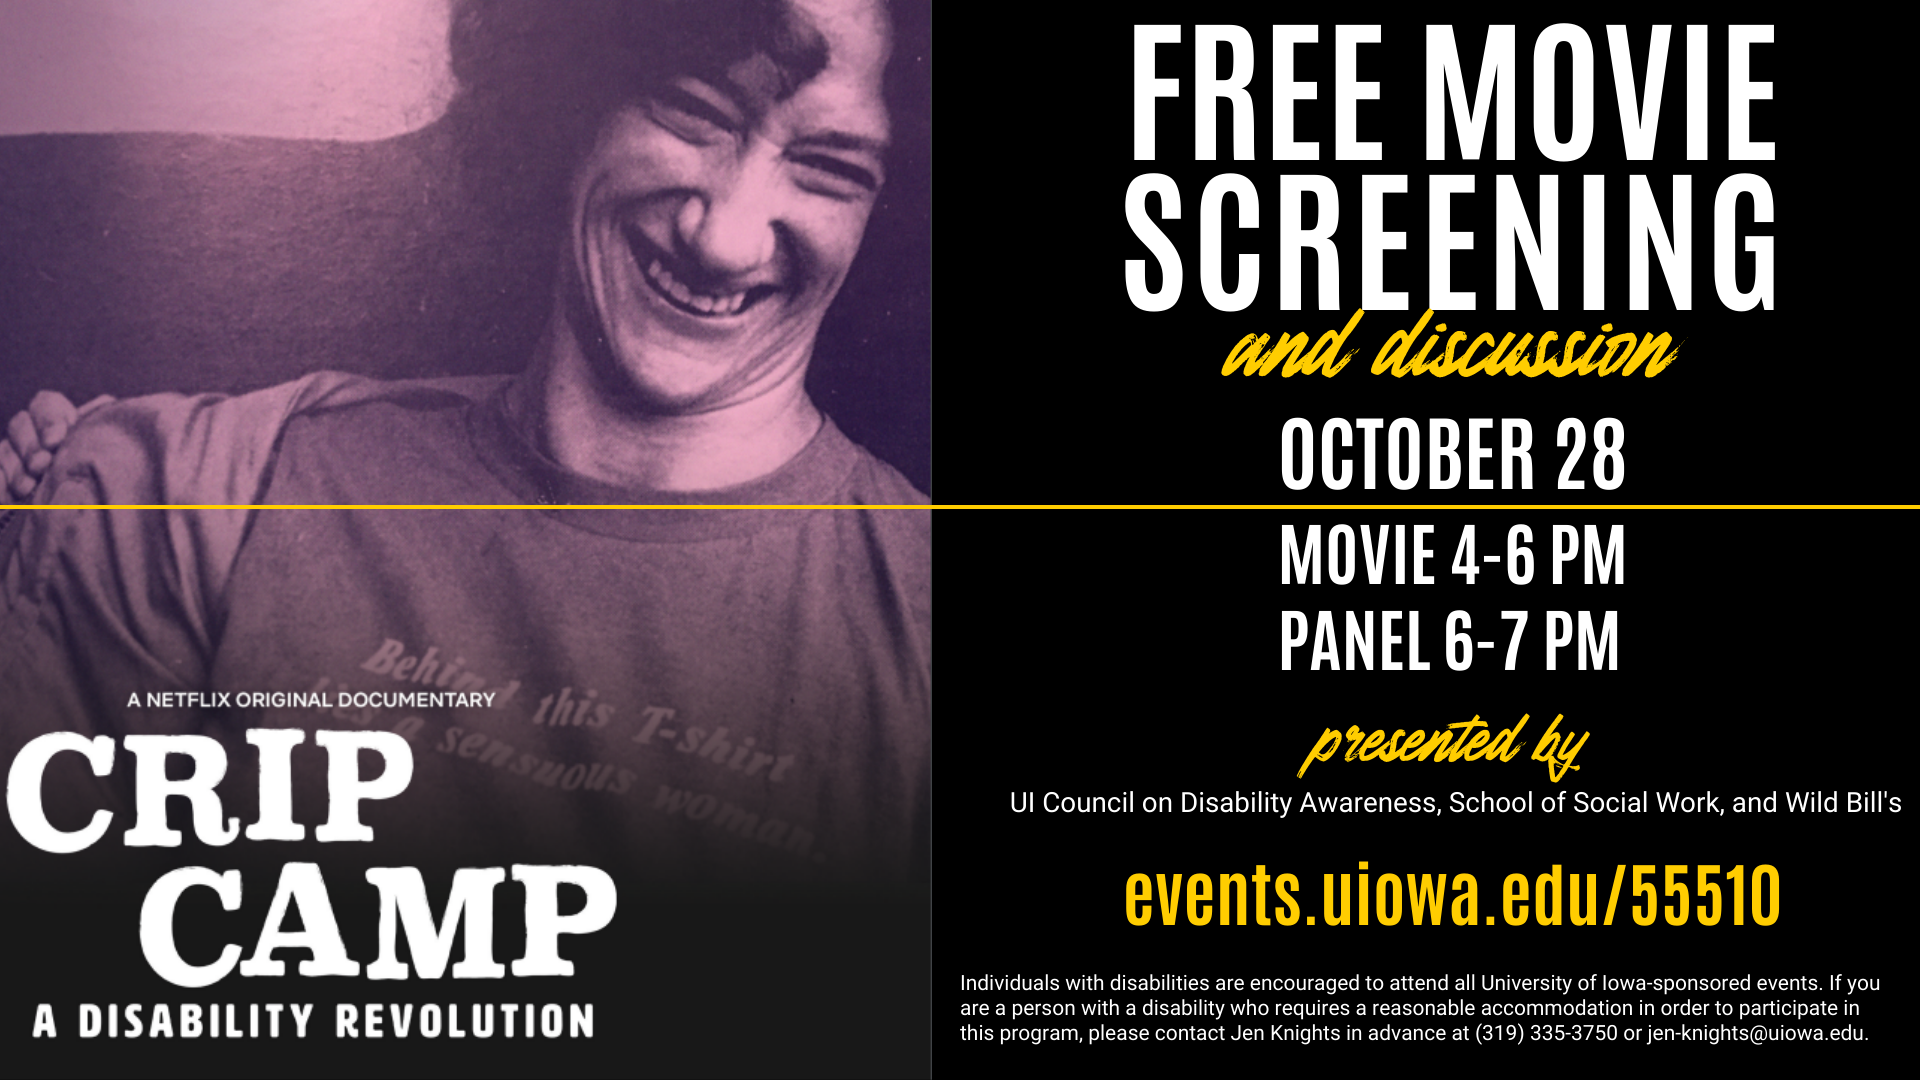 purple toned image of person smiling broadly leaning to one side, Crip Camp, Free Moving Screening